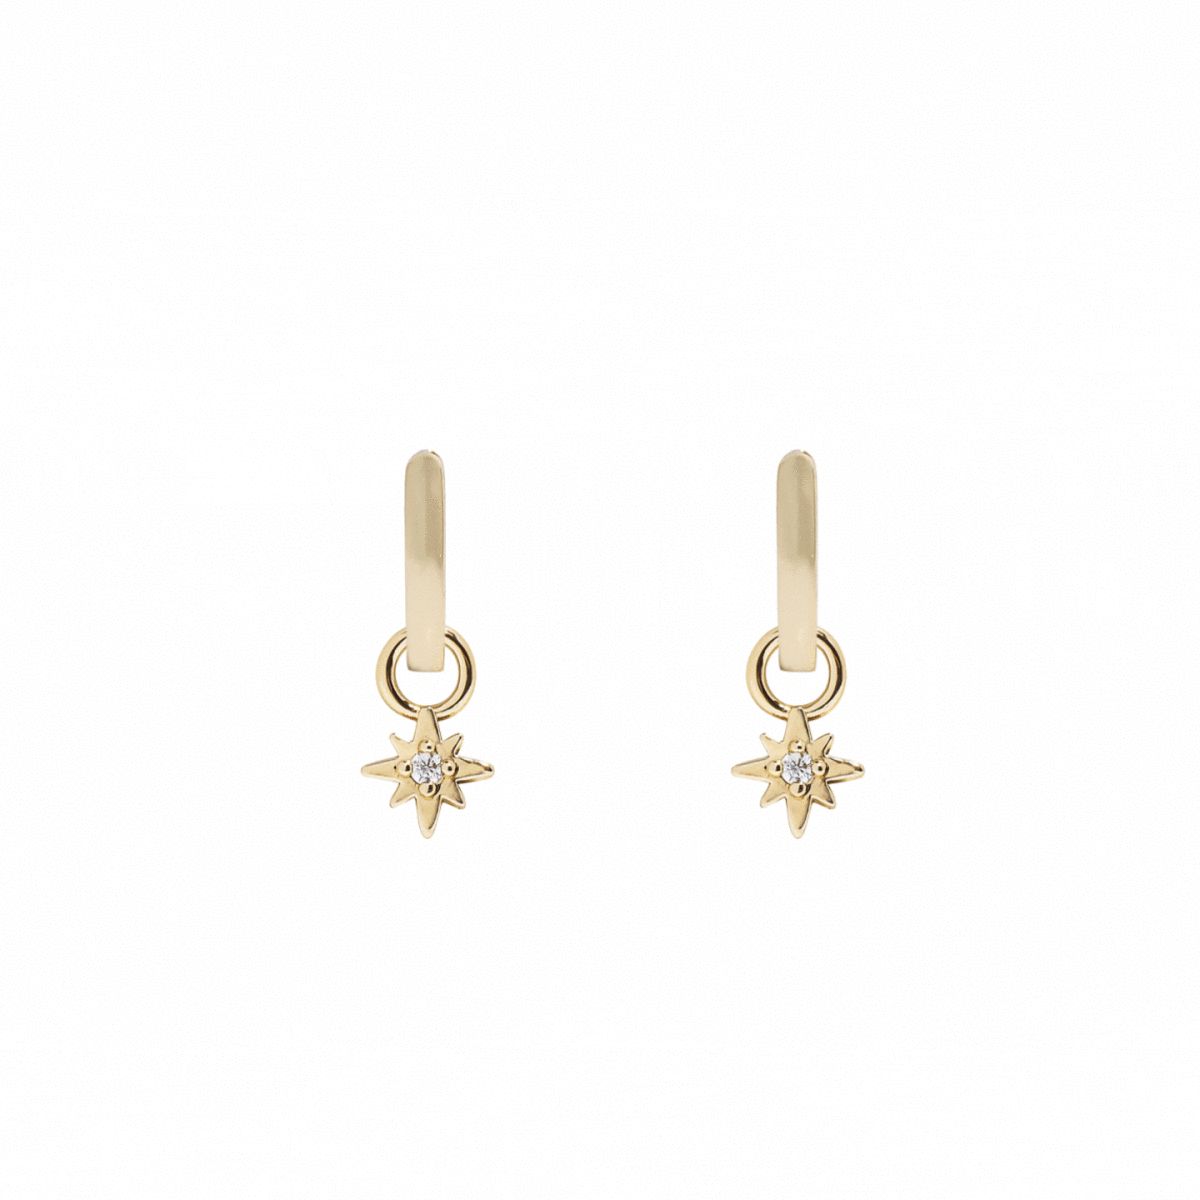 Summer earrings | Five And Two Jewelry